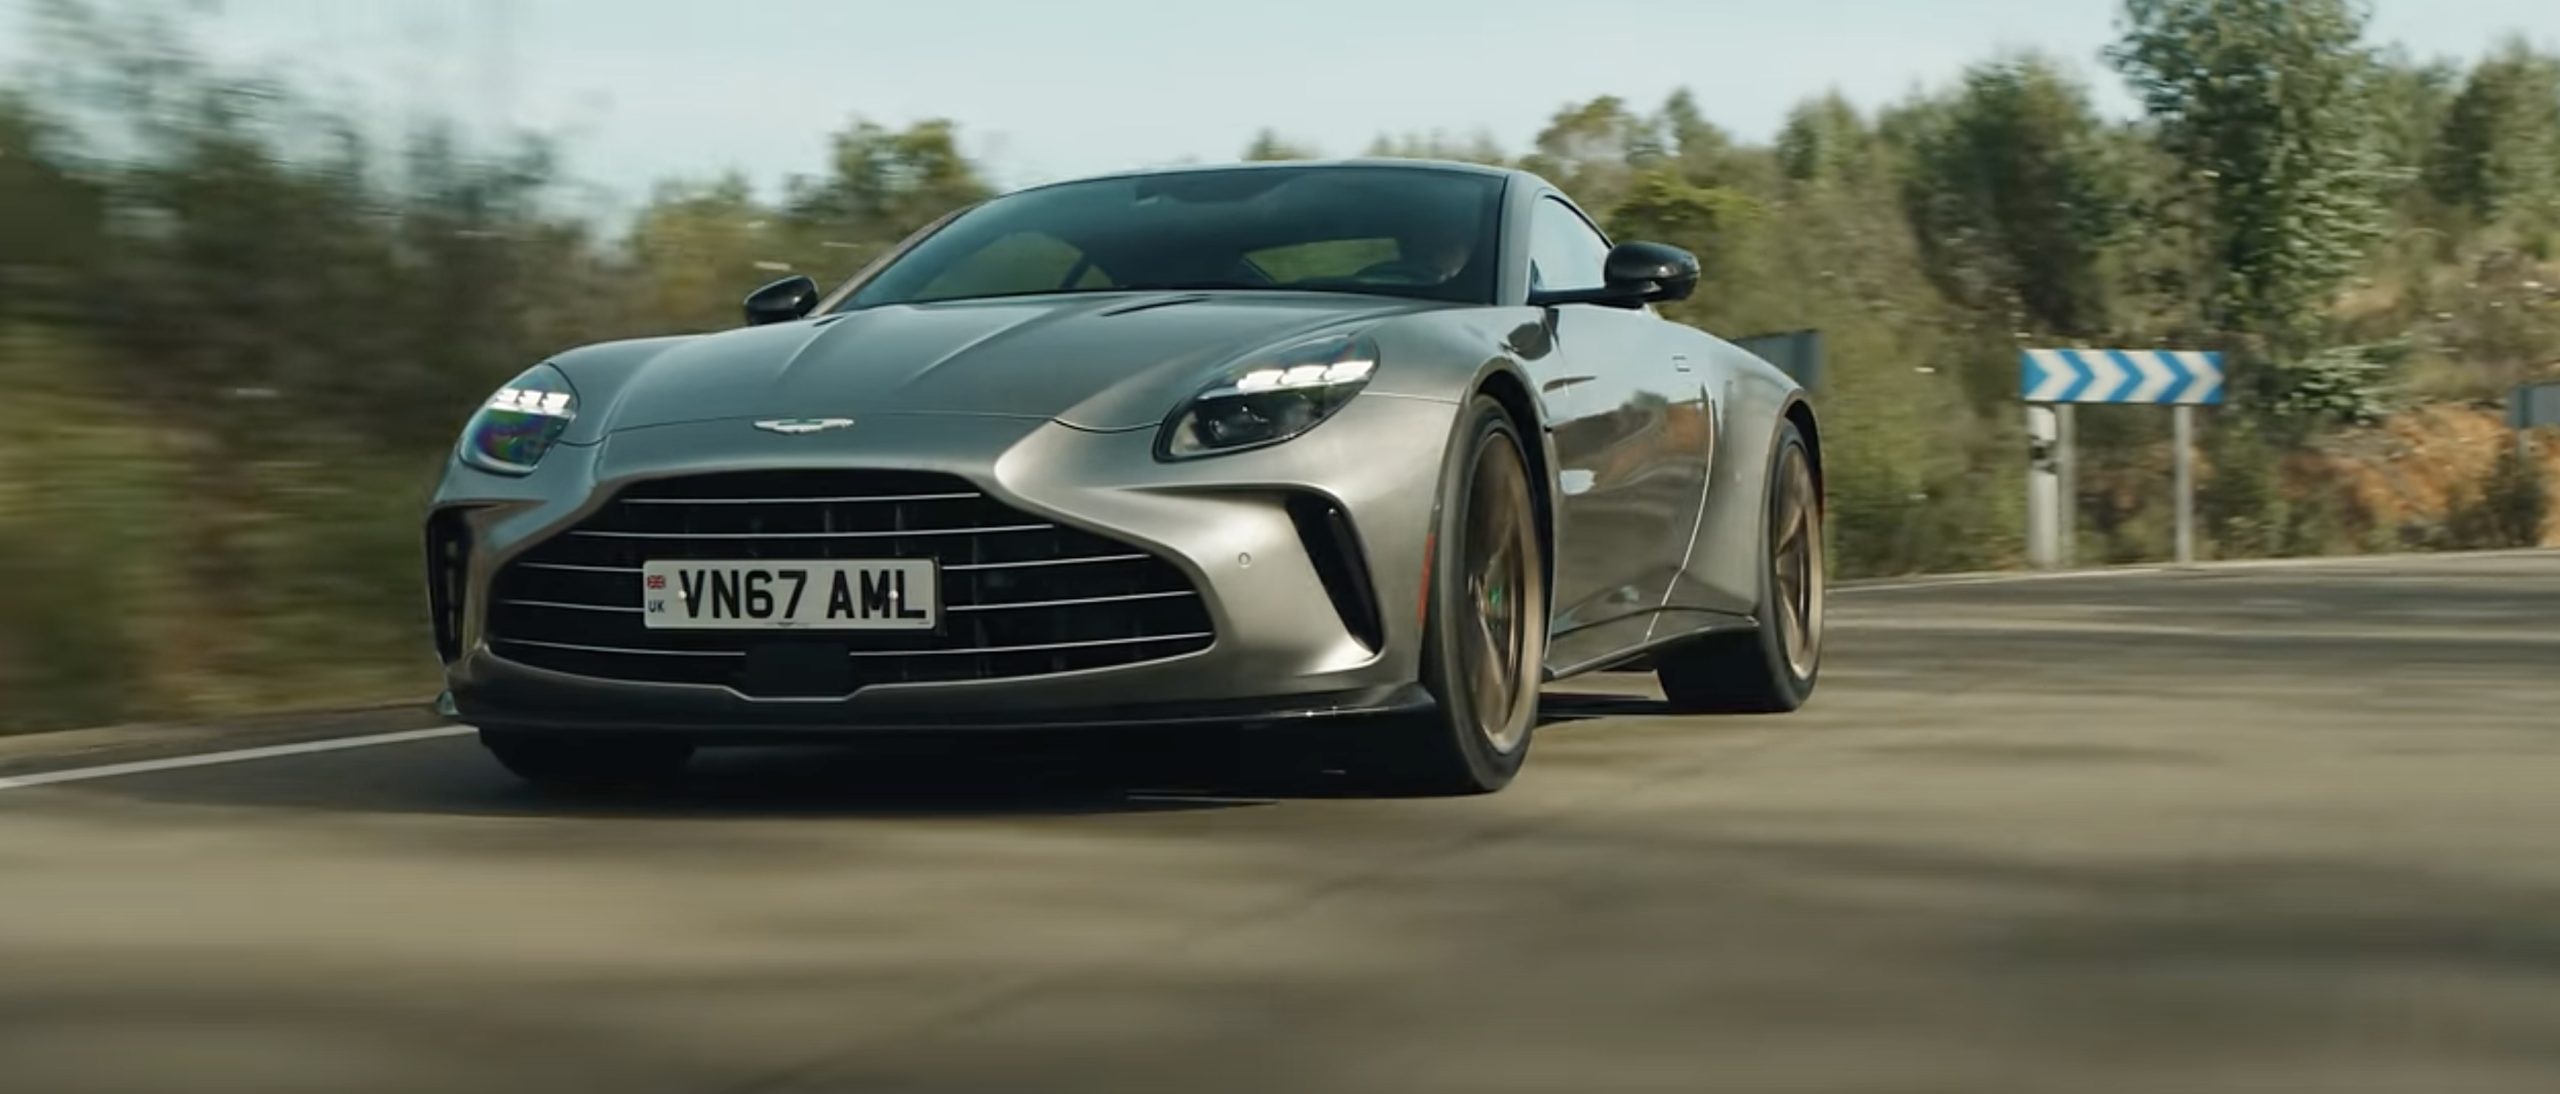 The Driver’s Seat: Henry Catchpole on the New Aston Martin Vantage